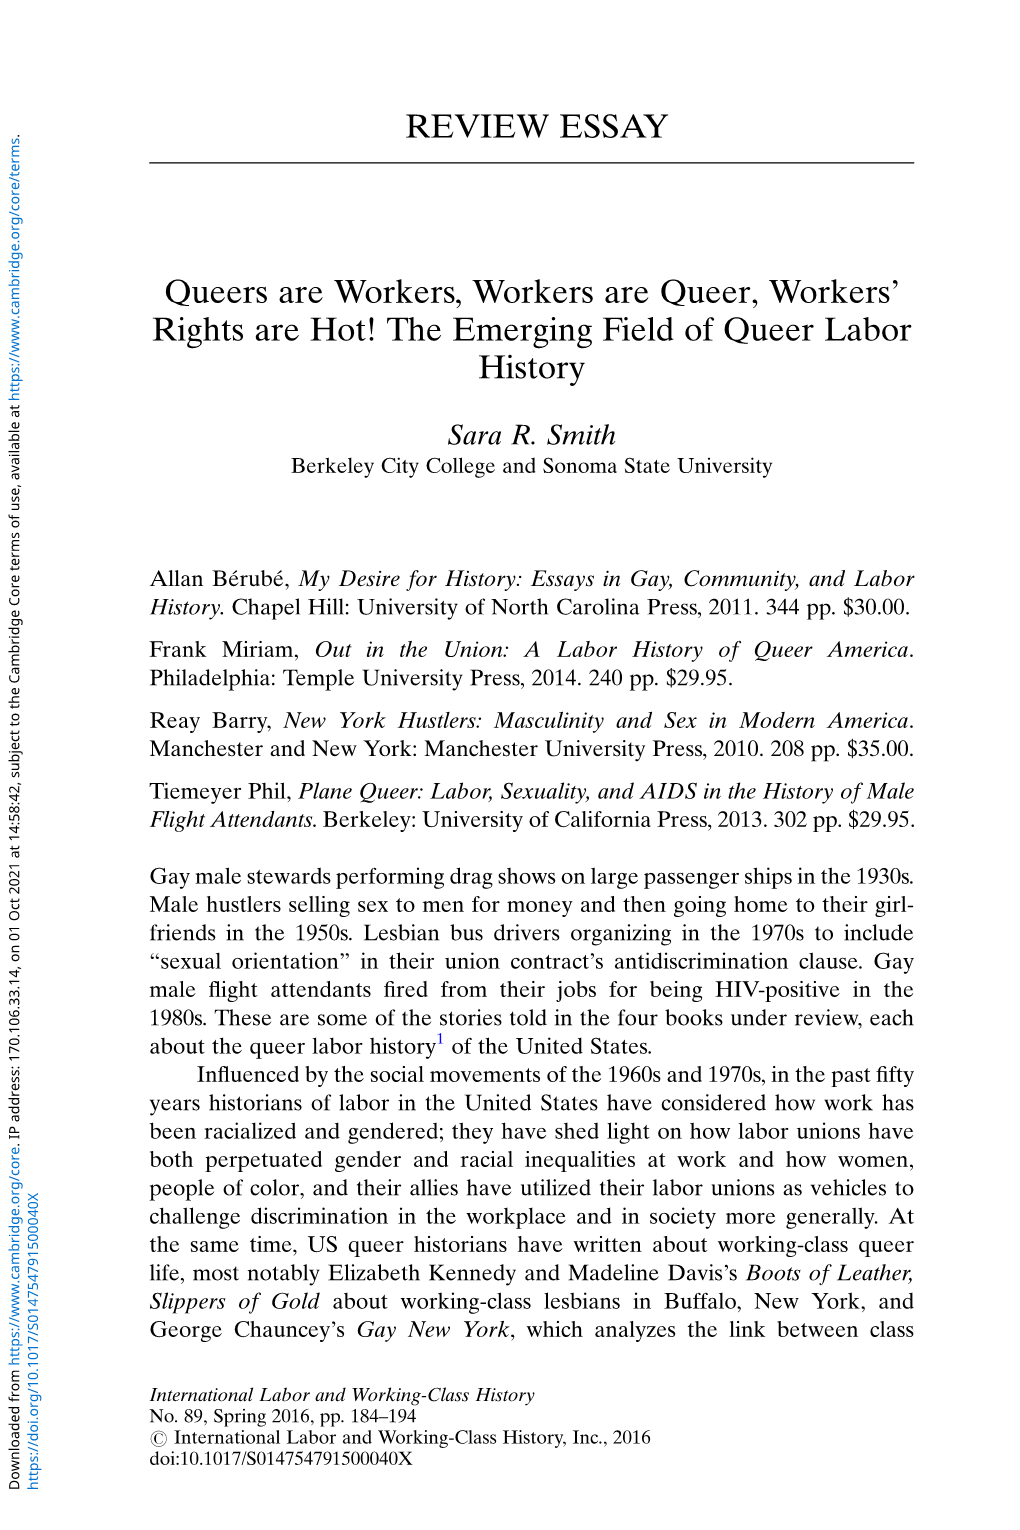 The Emerging Field of Queer Labor History